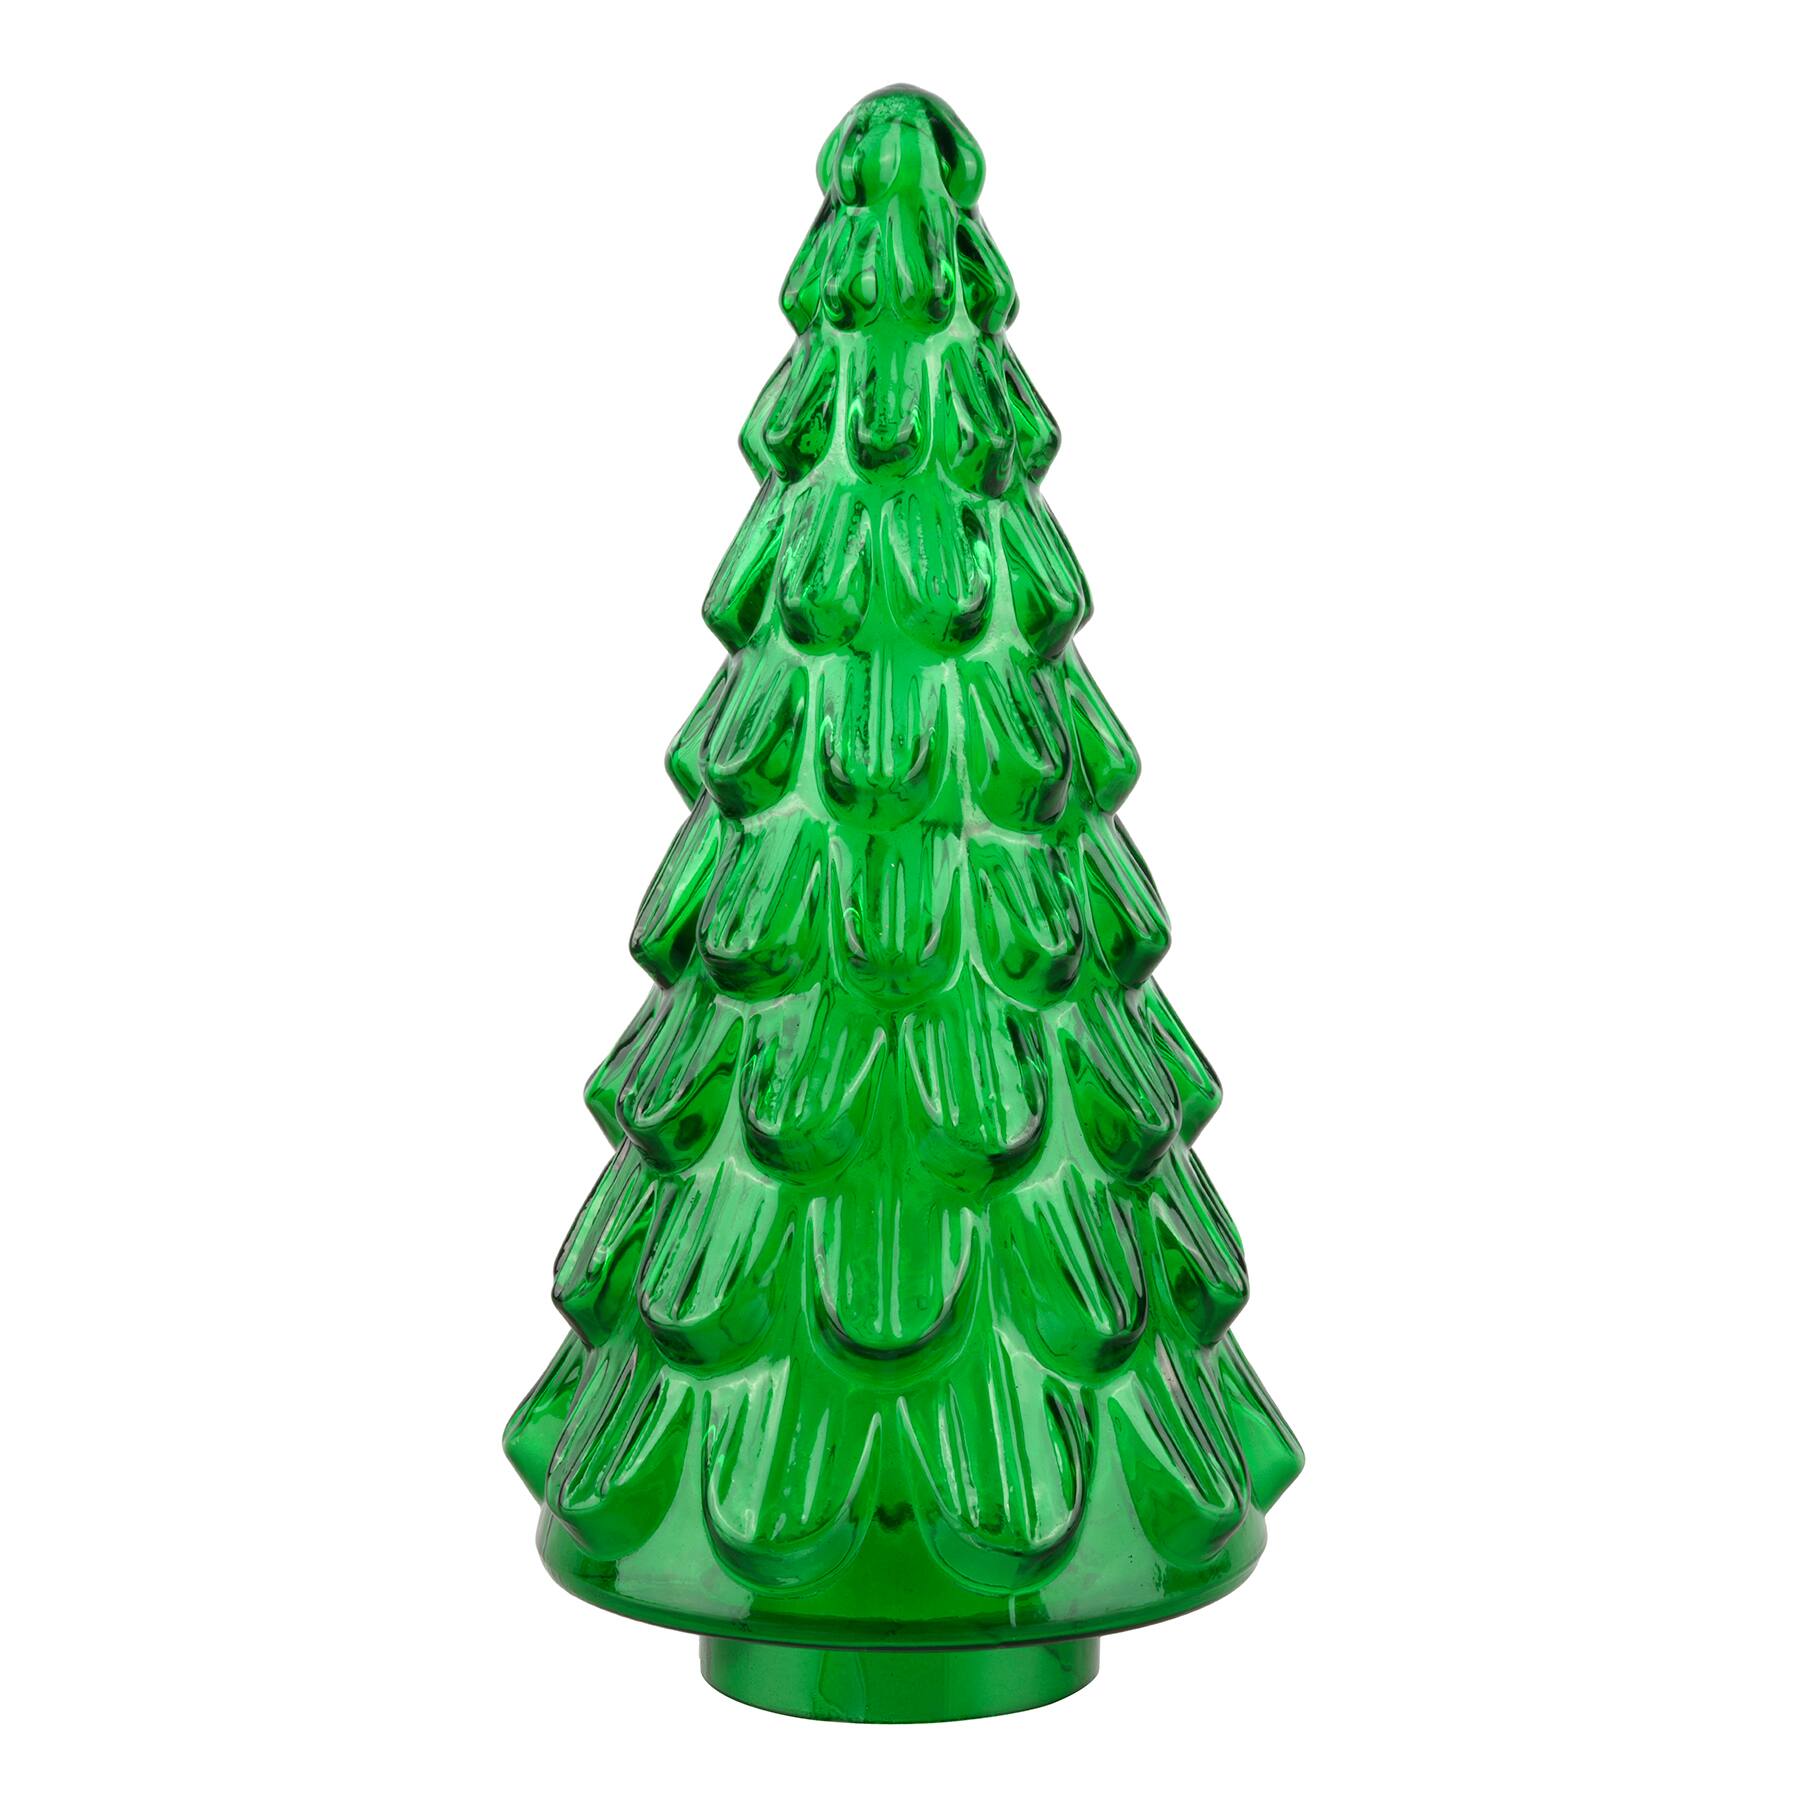 10.5" Green Glass Tabletop Tree by Ashland®